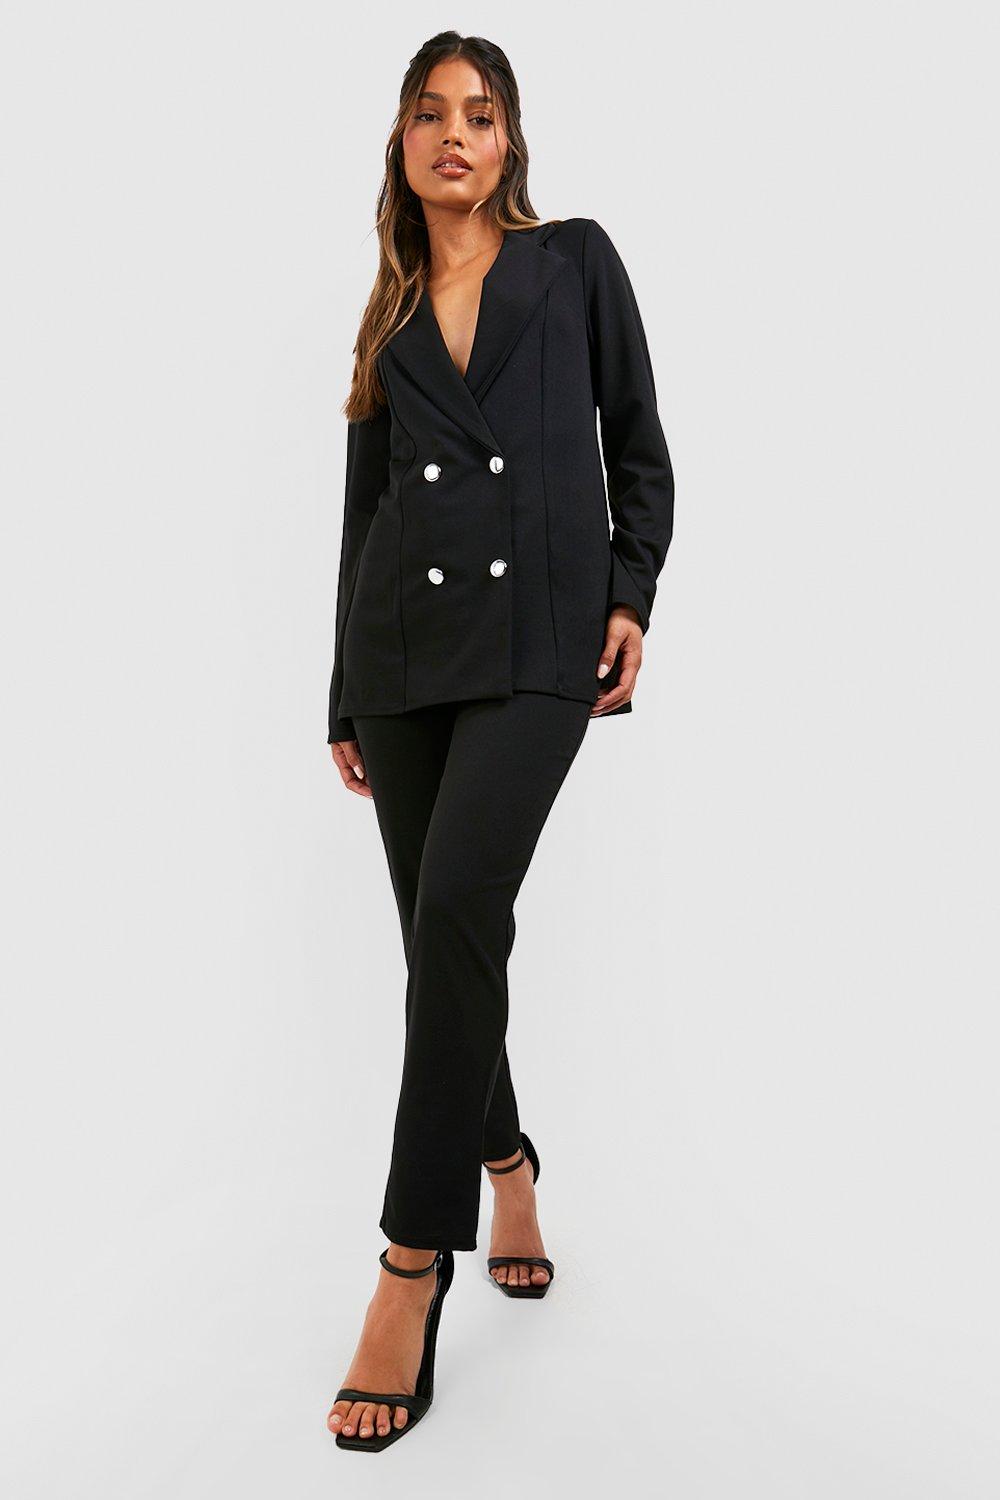 boohoo Women's Jersey Double Breasted Blazer And Trouser Suit Set|Size: 12|black